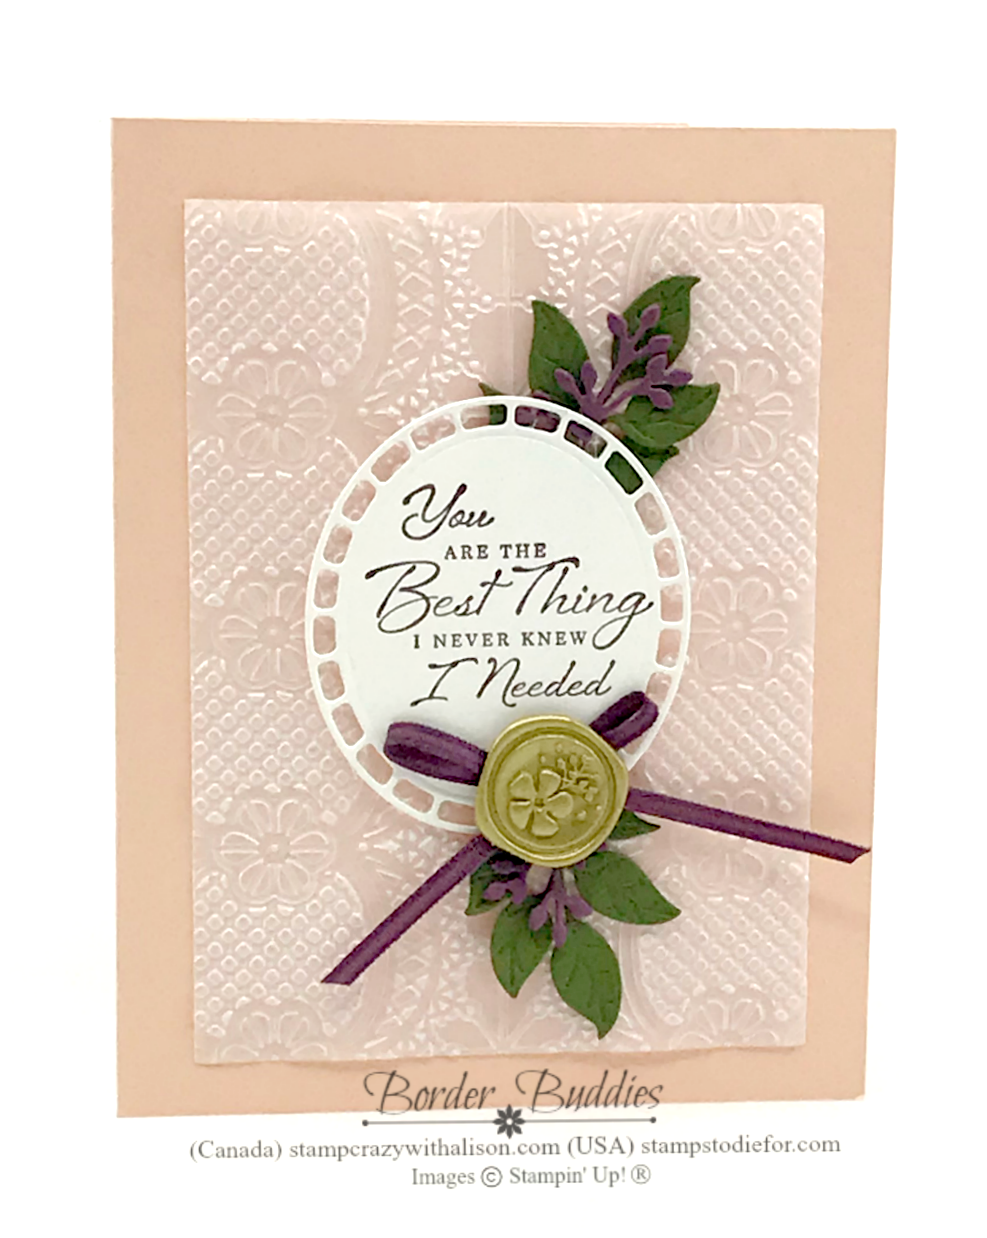 Suite Saturday Series with Floral Romance from Stampin’ Up!®